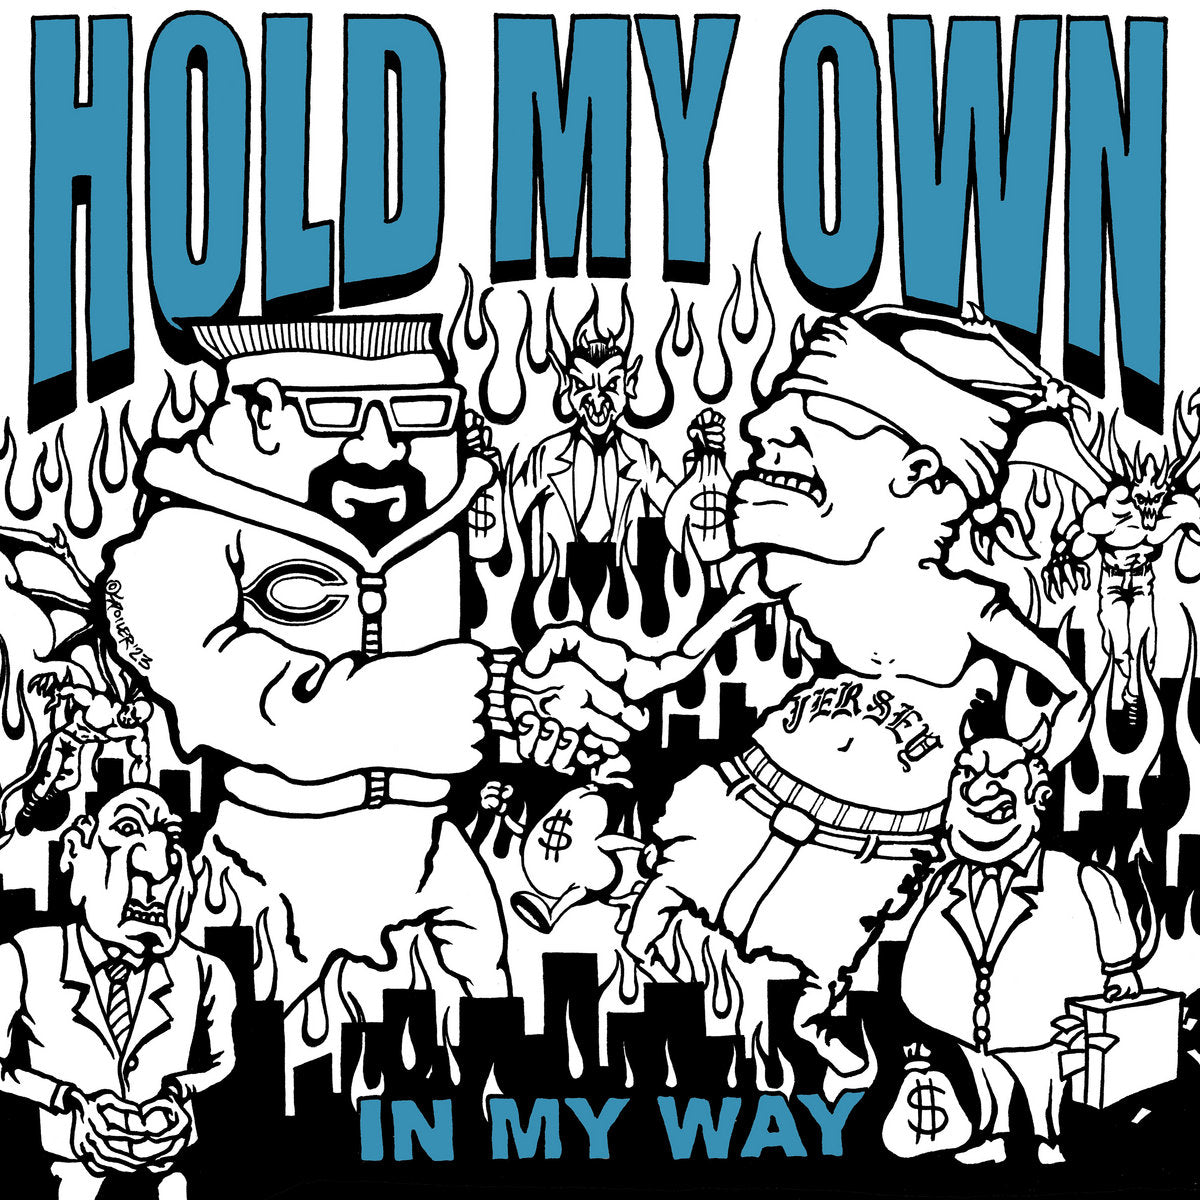 HOLD MY OWN "In My Way" LP